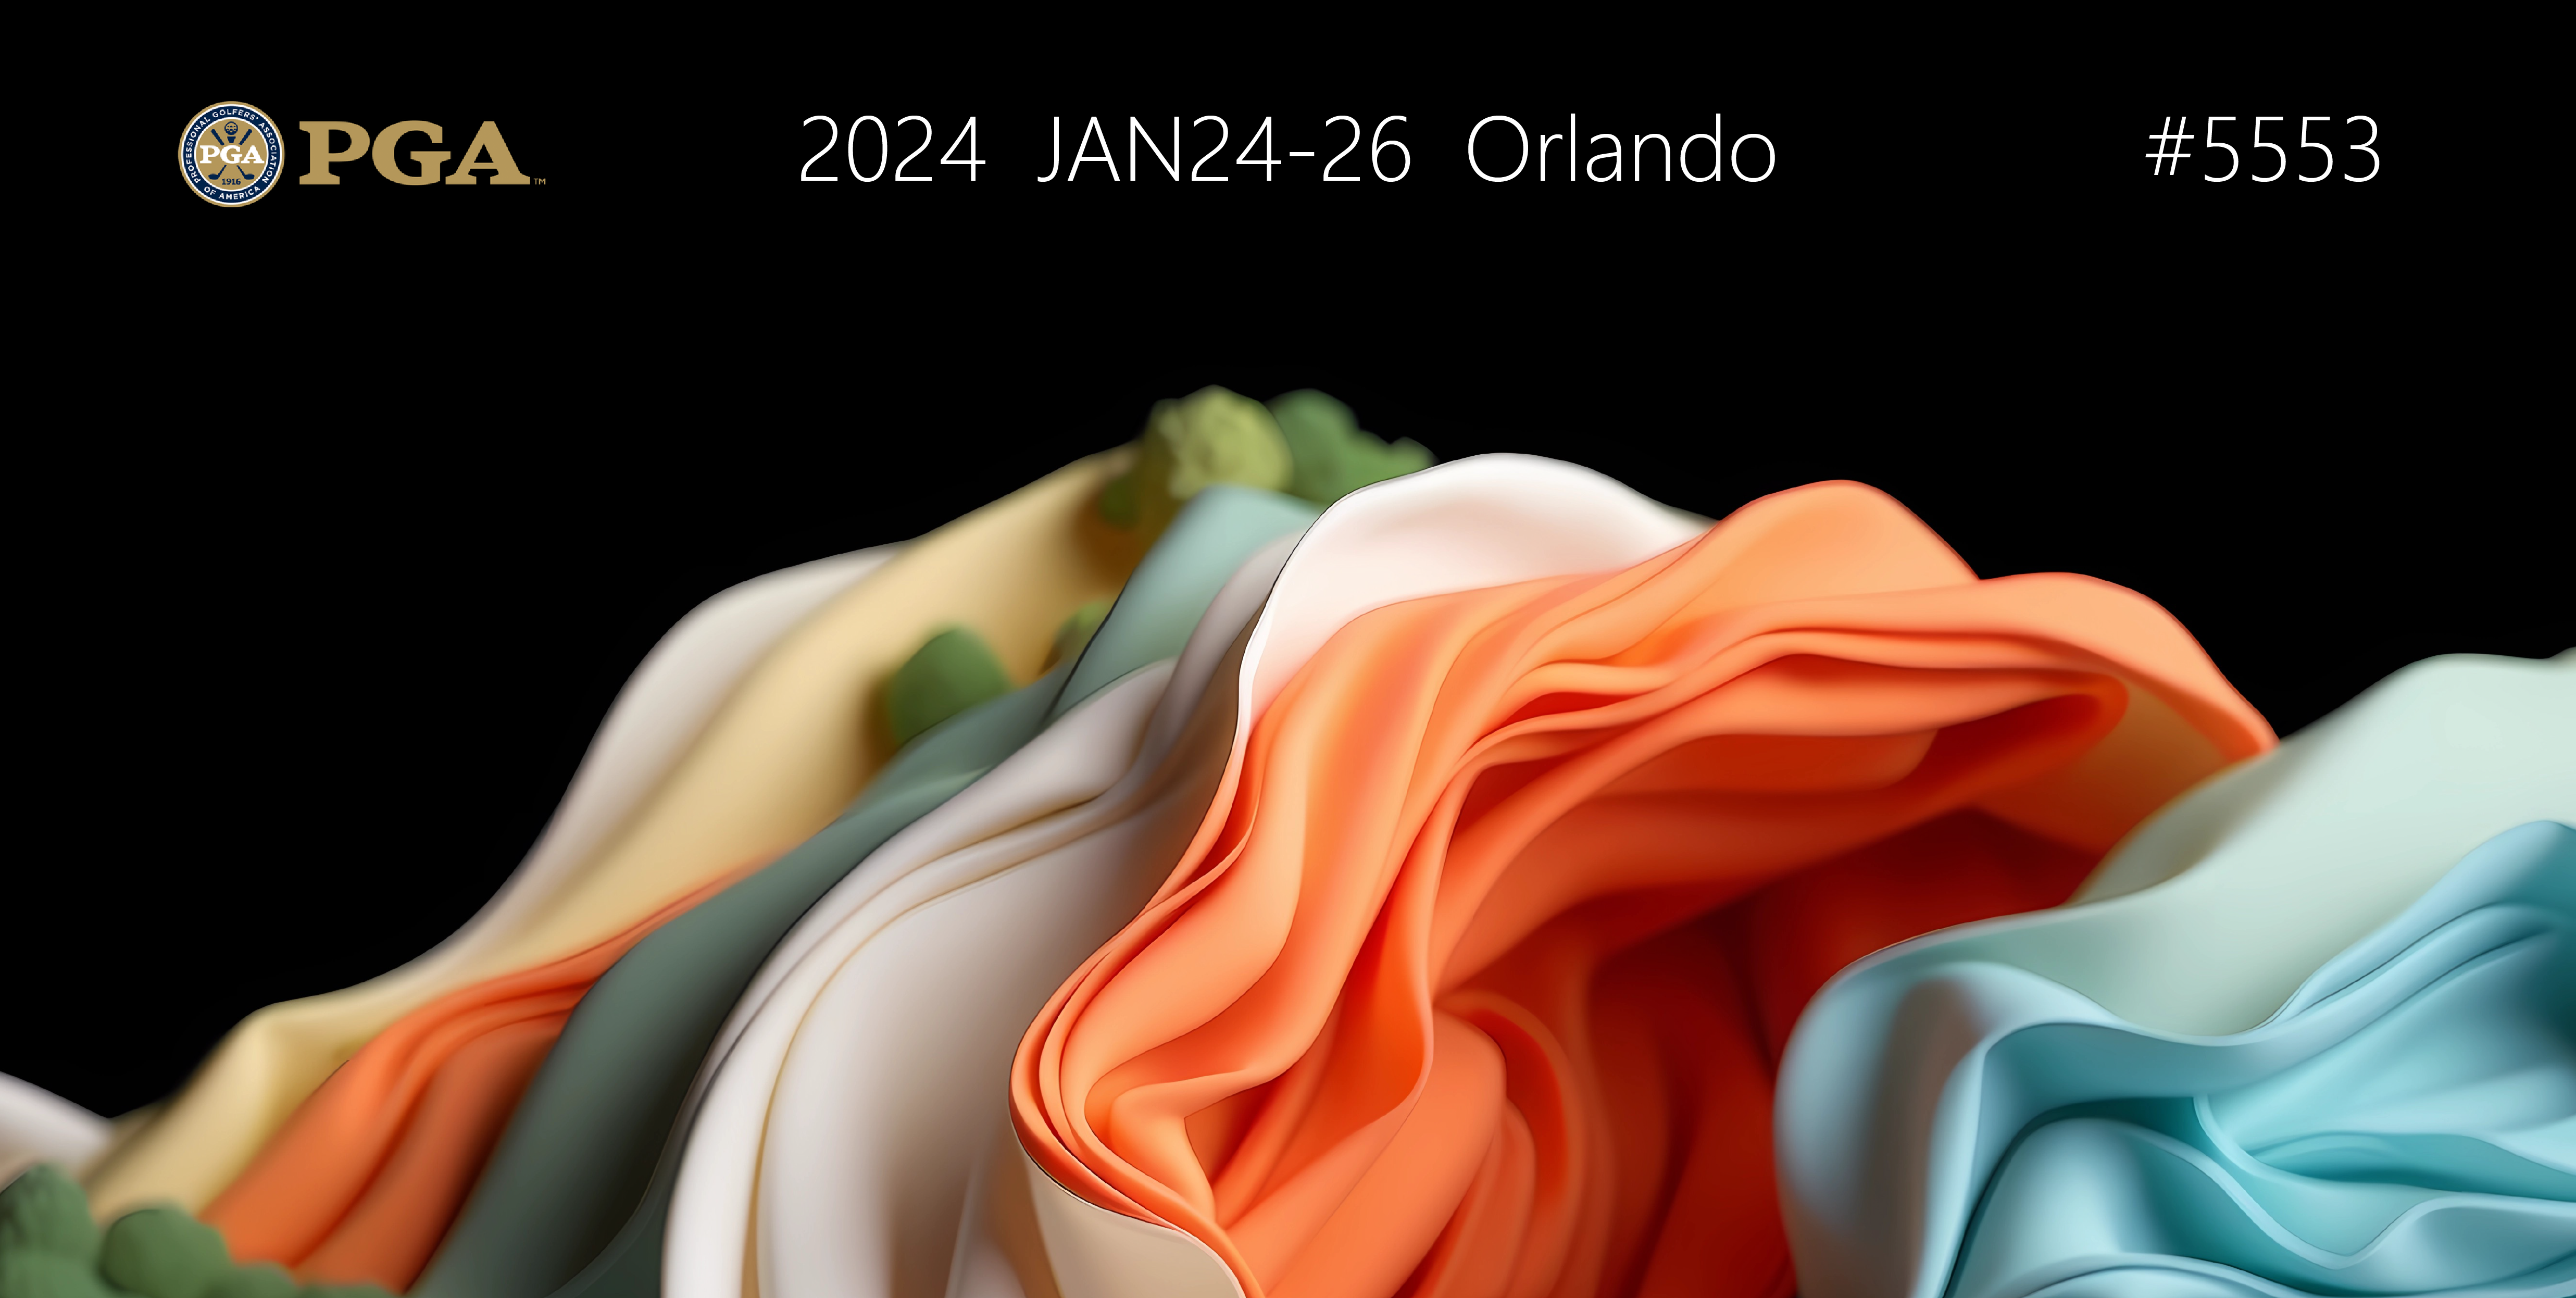 Hyperbola Tees Up Style at the PGA Show in Orlando Jan 24-26, 2024!™